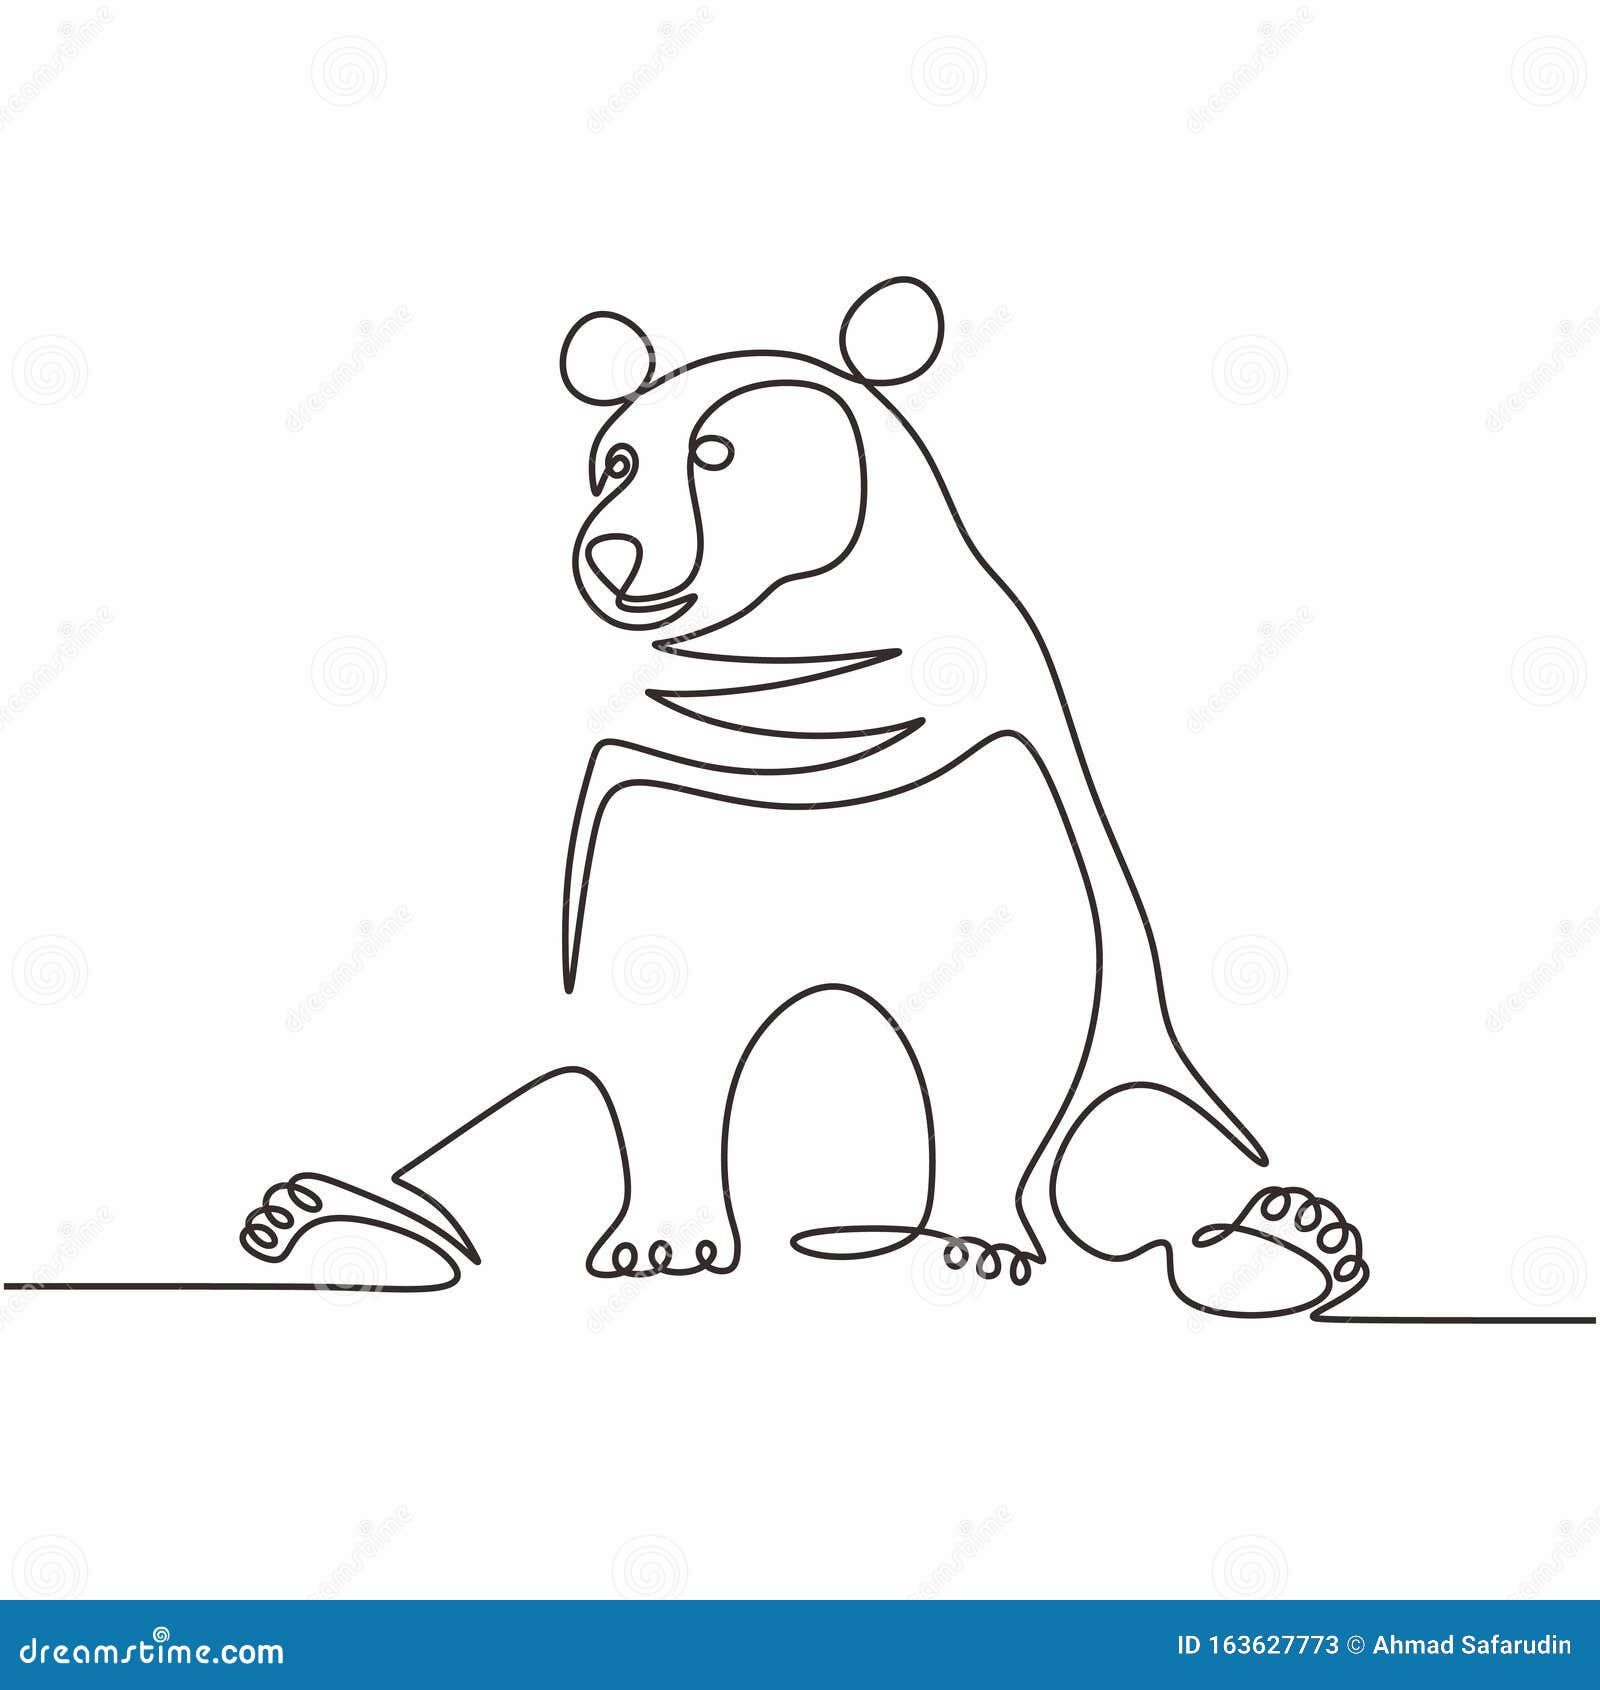 continuous single line drawing of bear wild animals  . one hand drawn winter animal mascot minimalism of polar